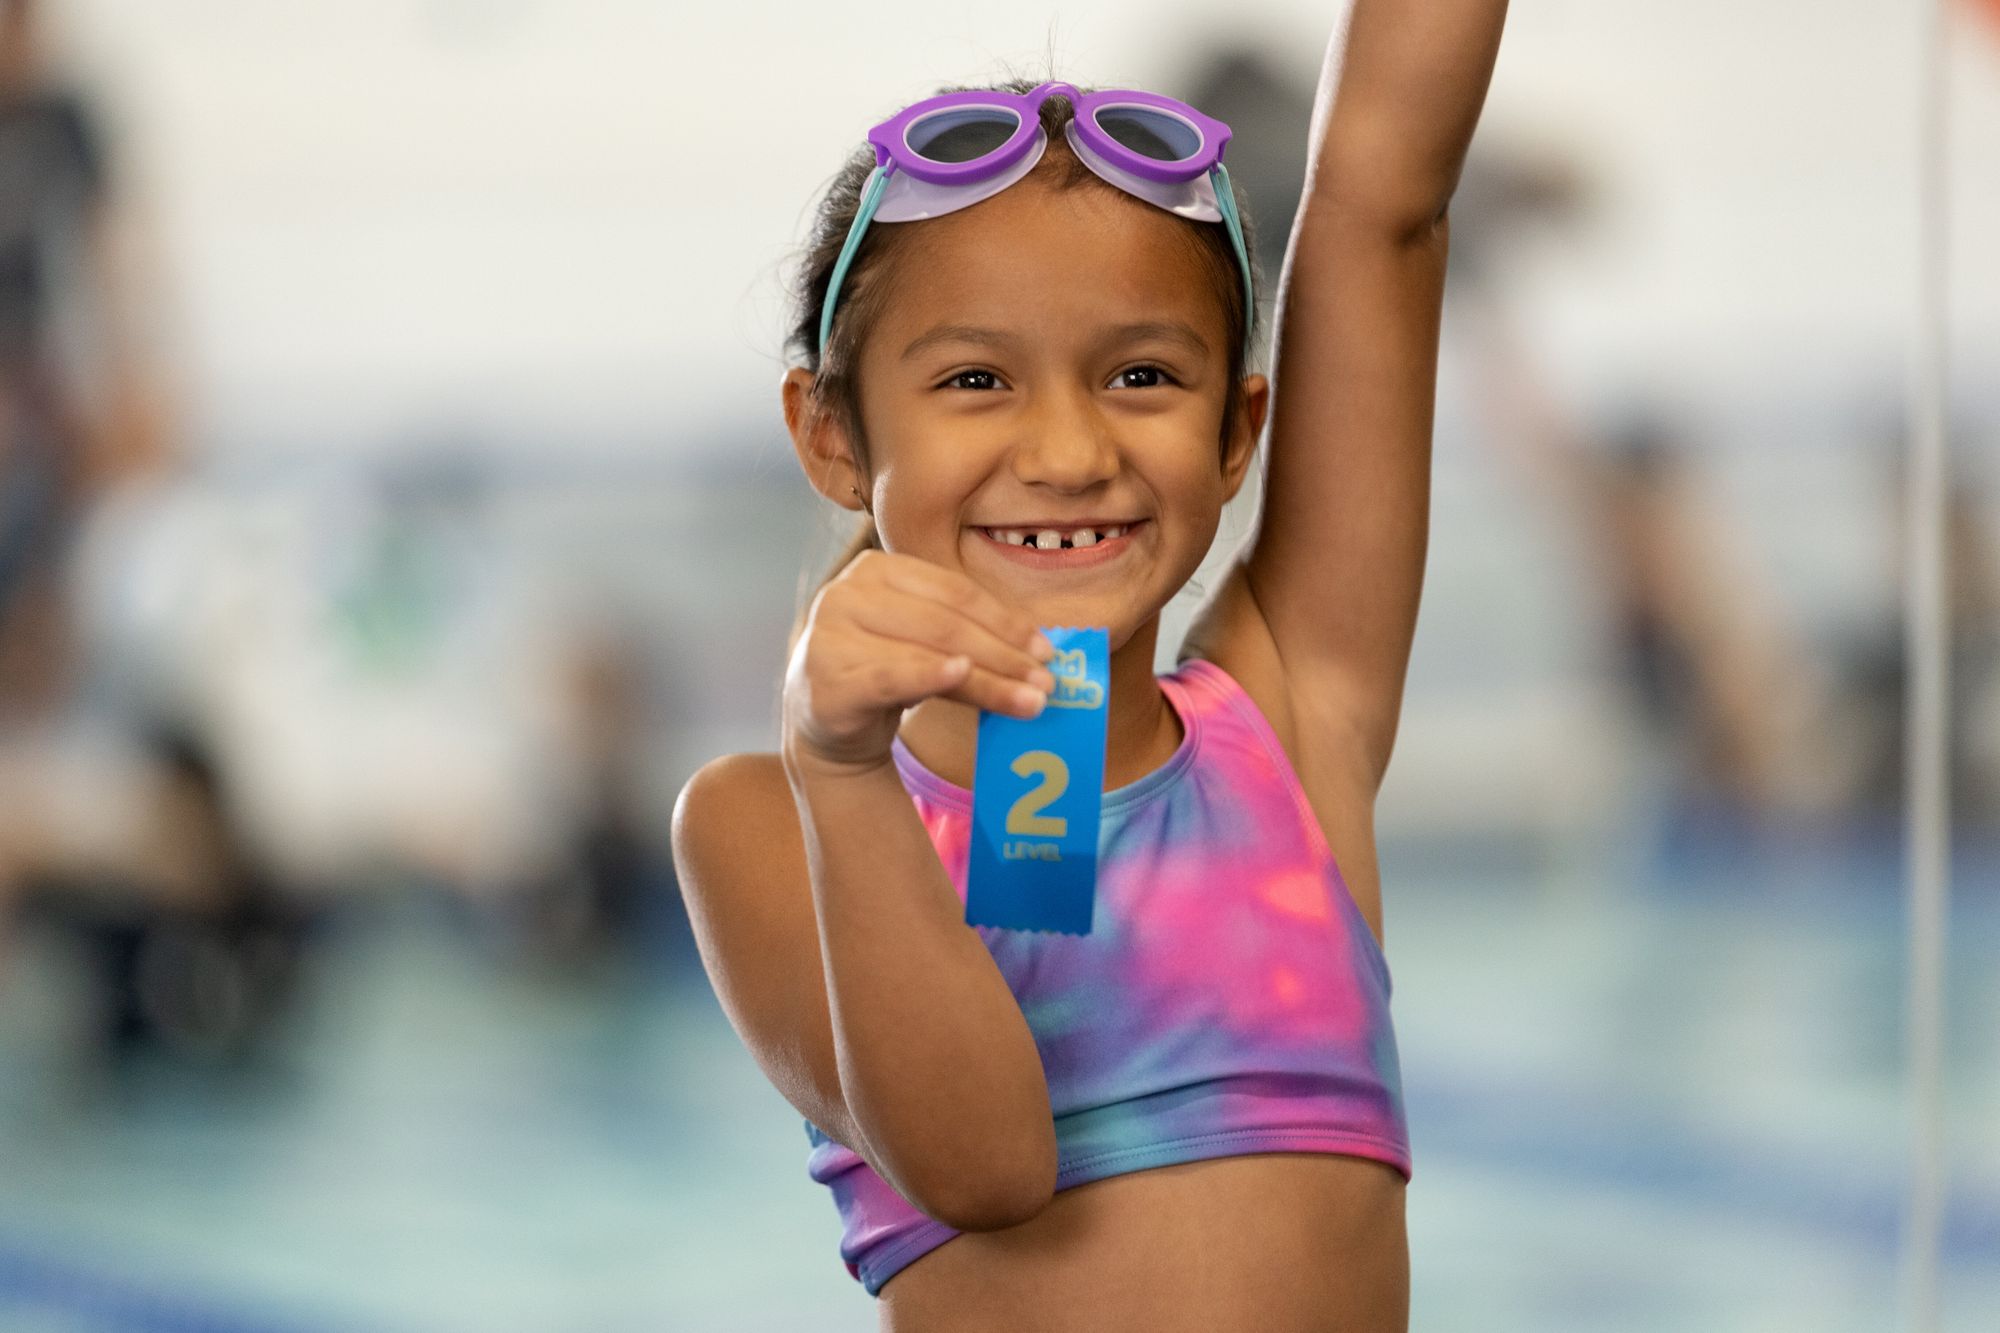 Rest assured knowing that we make swim lesson sign ups easy, so you can focus on your child's BIG moments during the summer!